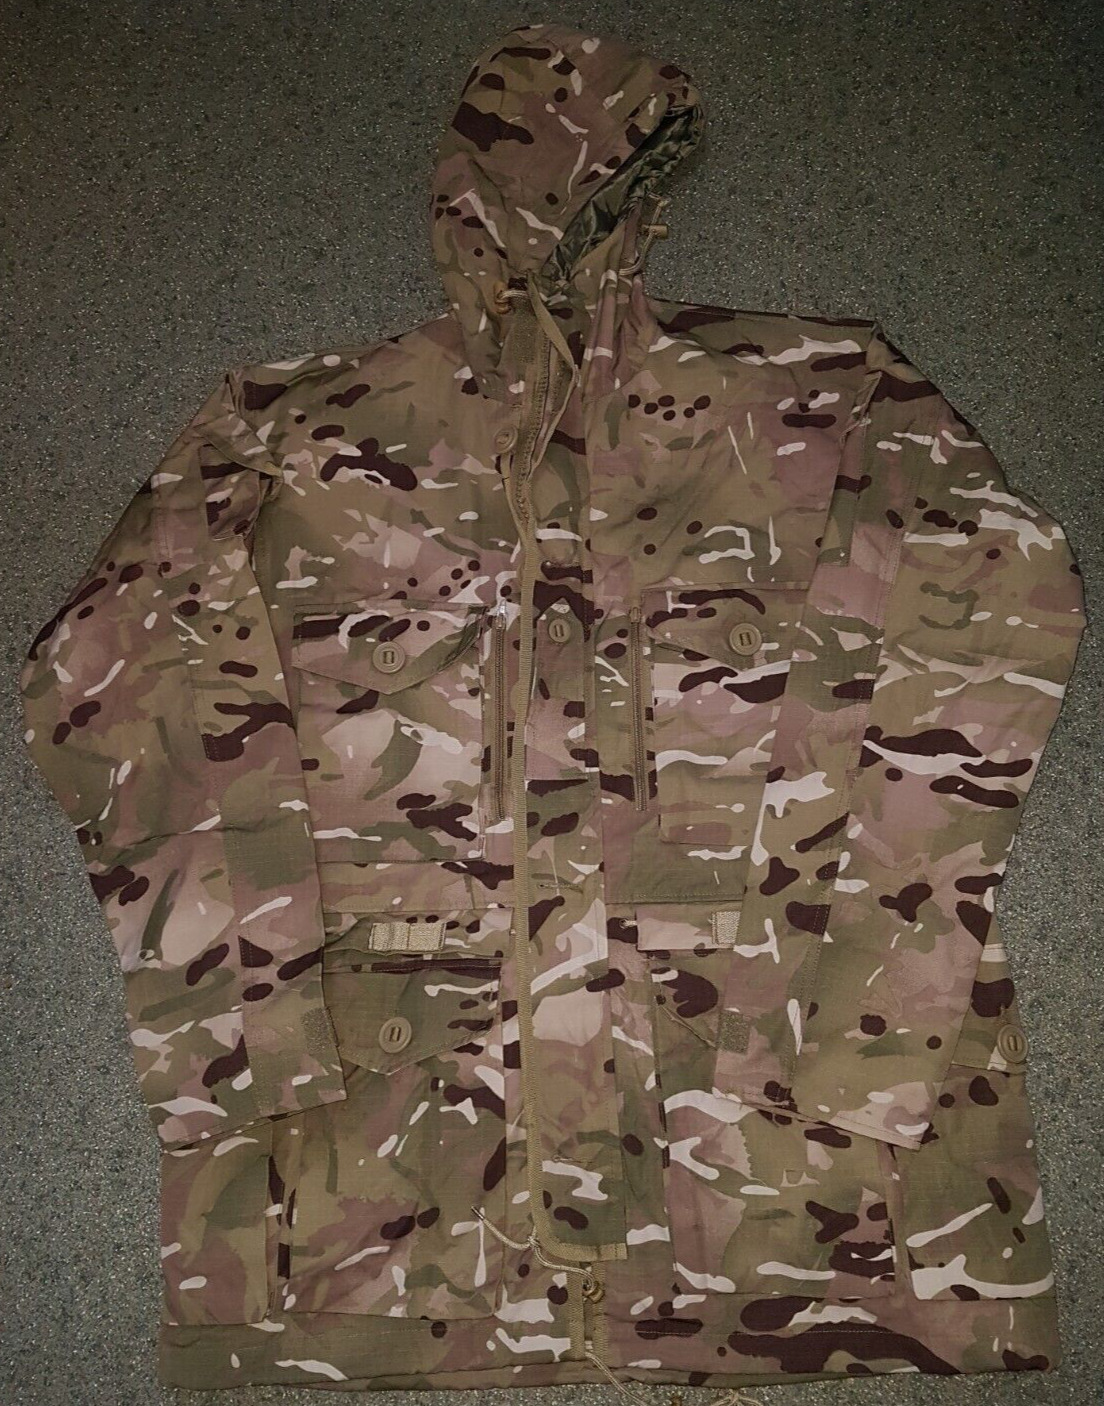 KITPIMP WINDPROOF COMBAT SMOCK, IN MULTICAM, EXTRA LARGE SIZE, NEW